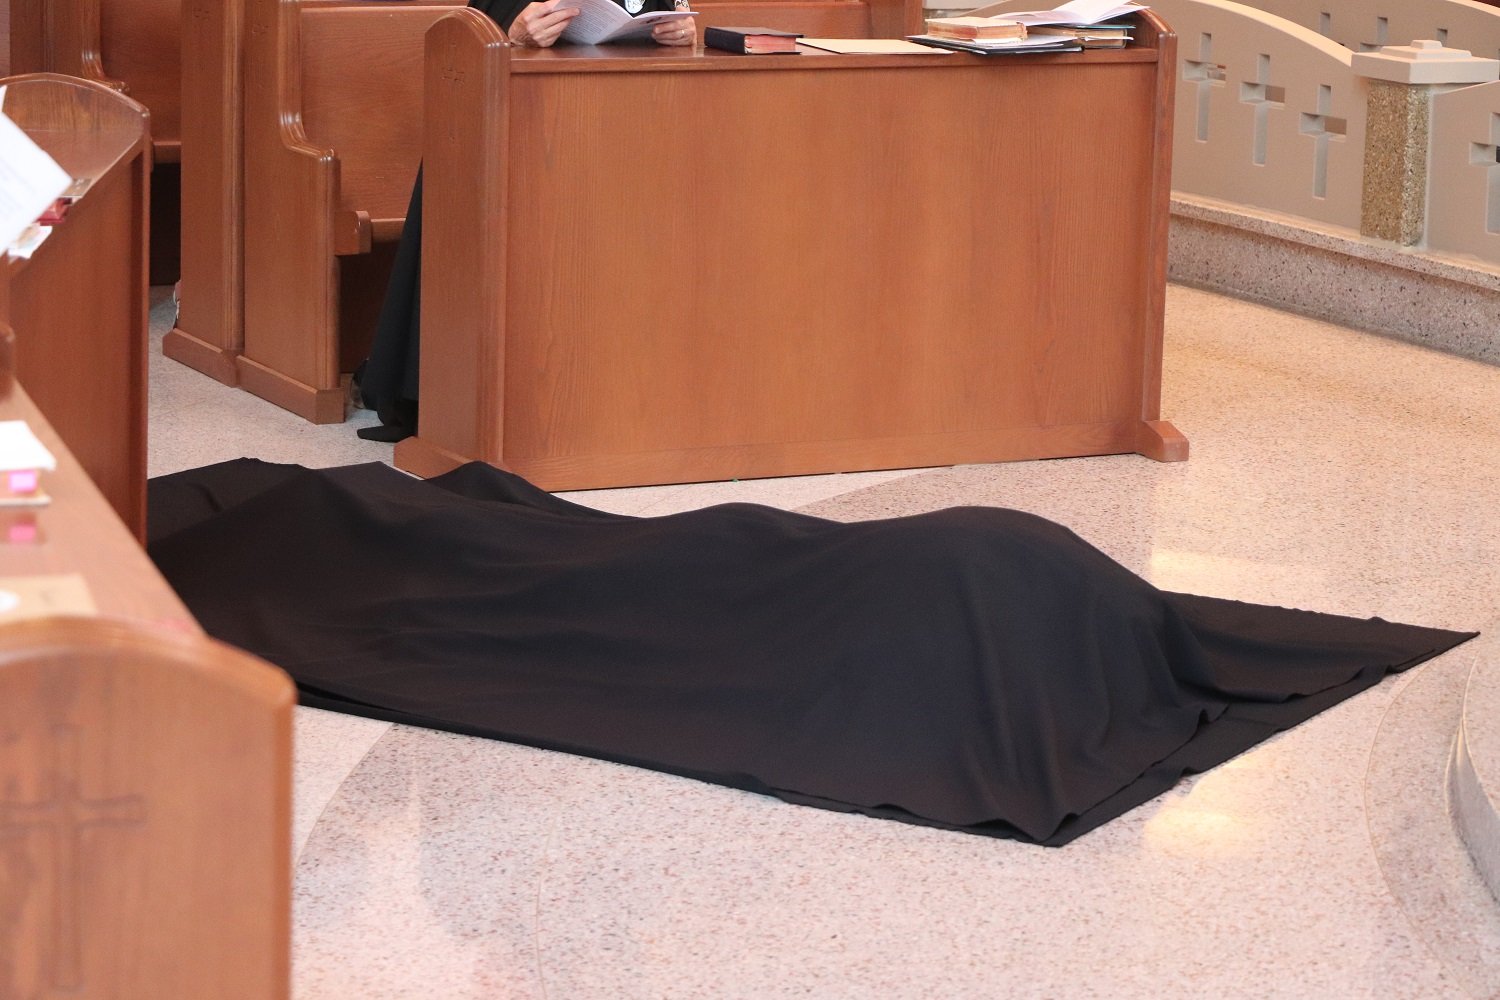  Sister lies prostrate beneath a black funeral pall as the Litany of the Saints is chanted 